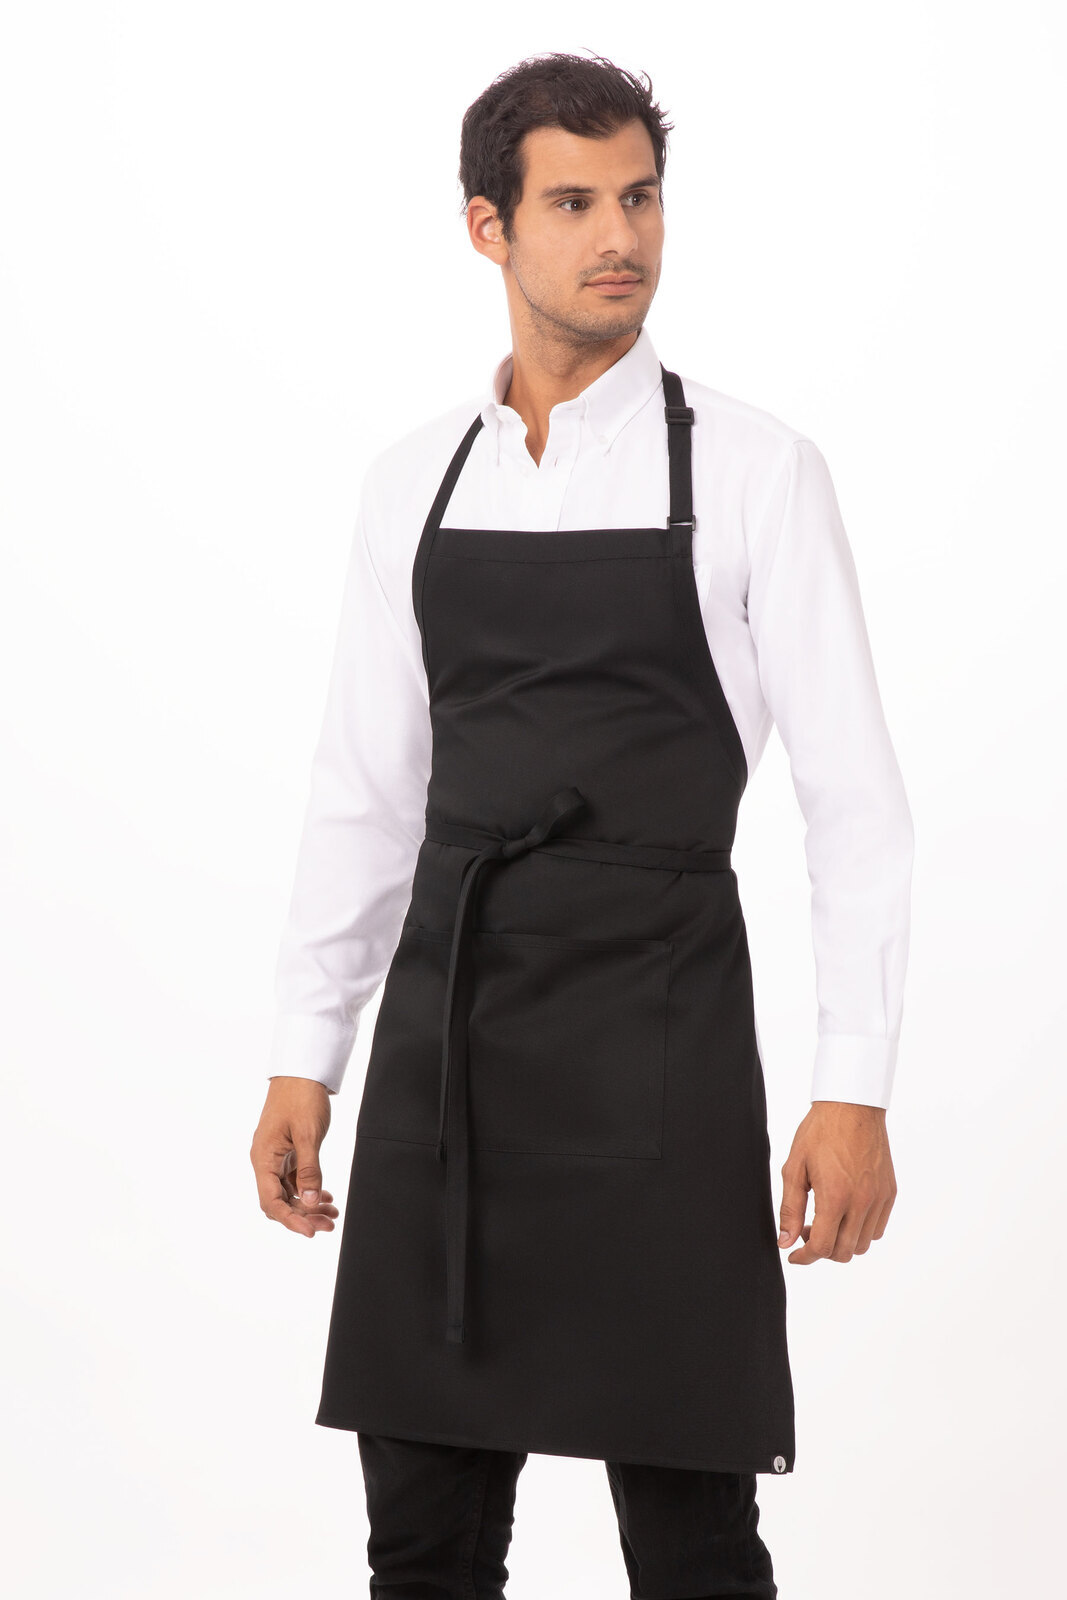 Chef Works Australia Culinary Wear Clothing And Uniforms For Restaurants And Hotels 